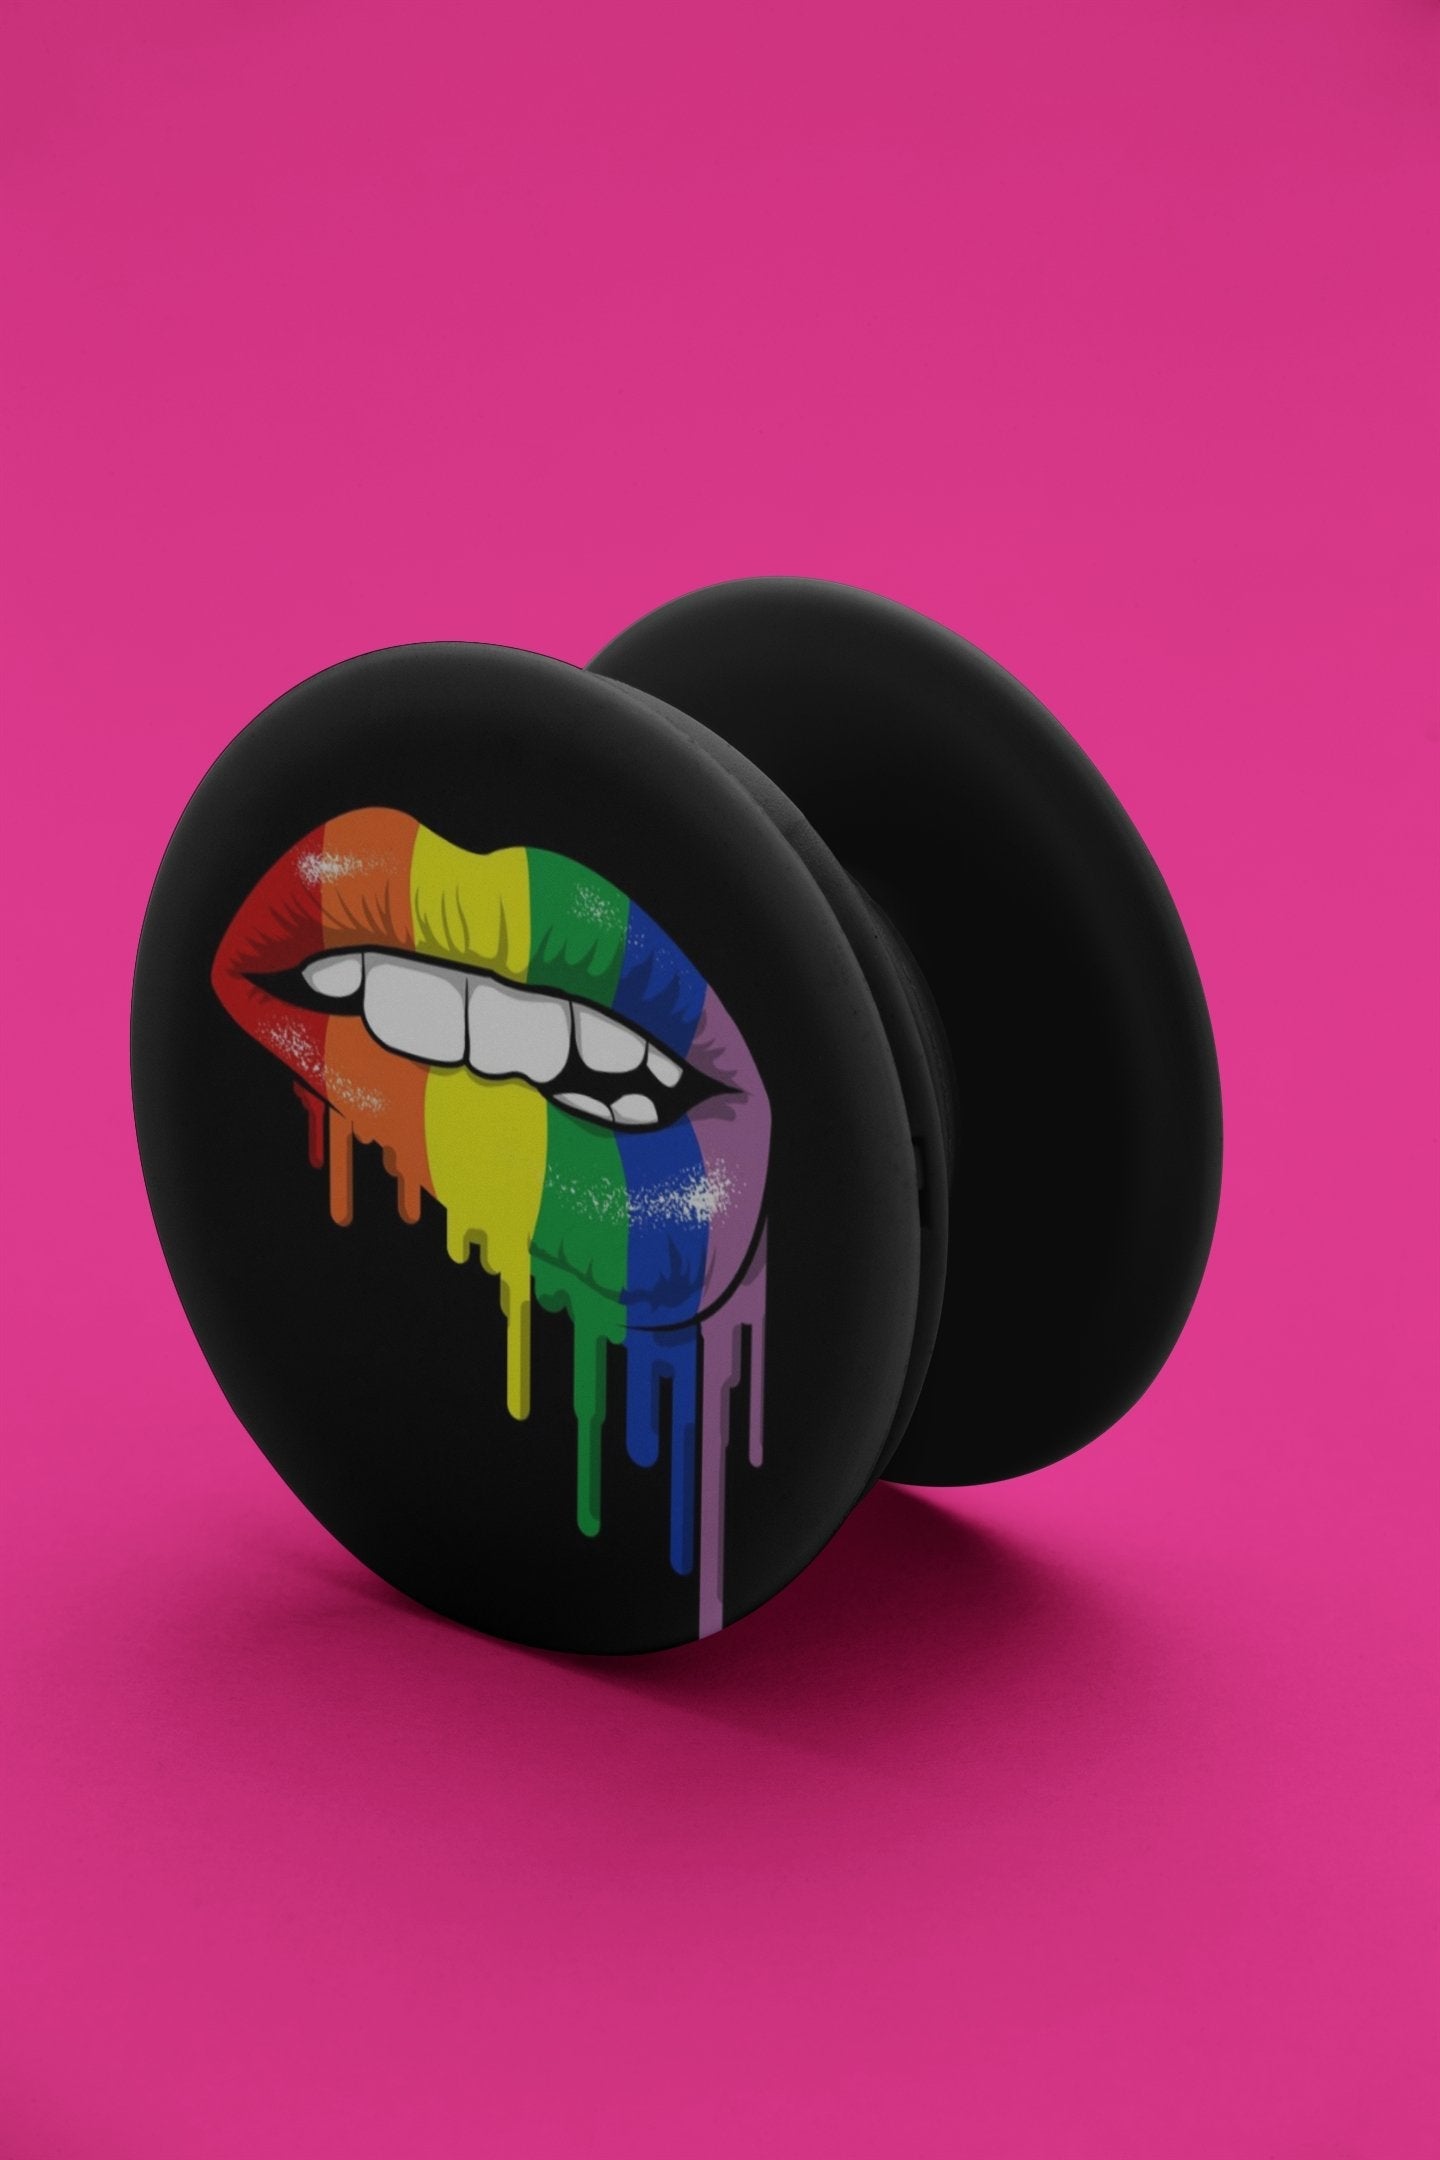 thelegalgang,LGBT Colorful Lips Design Pop Grip,POP GRIPS.